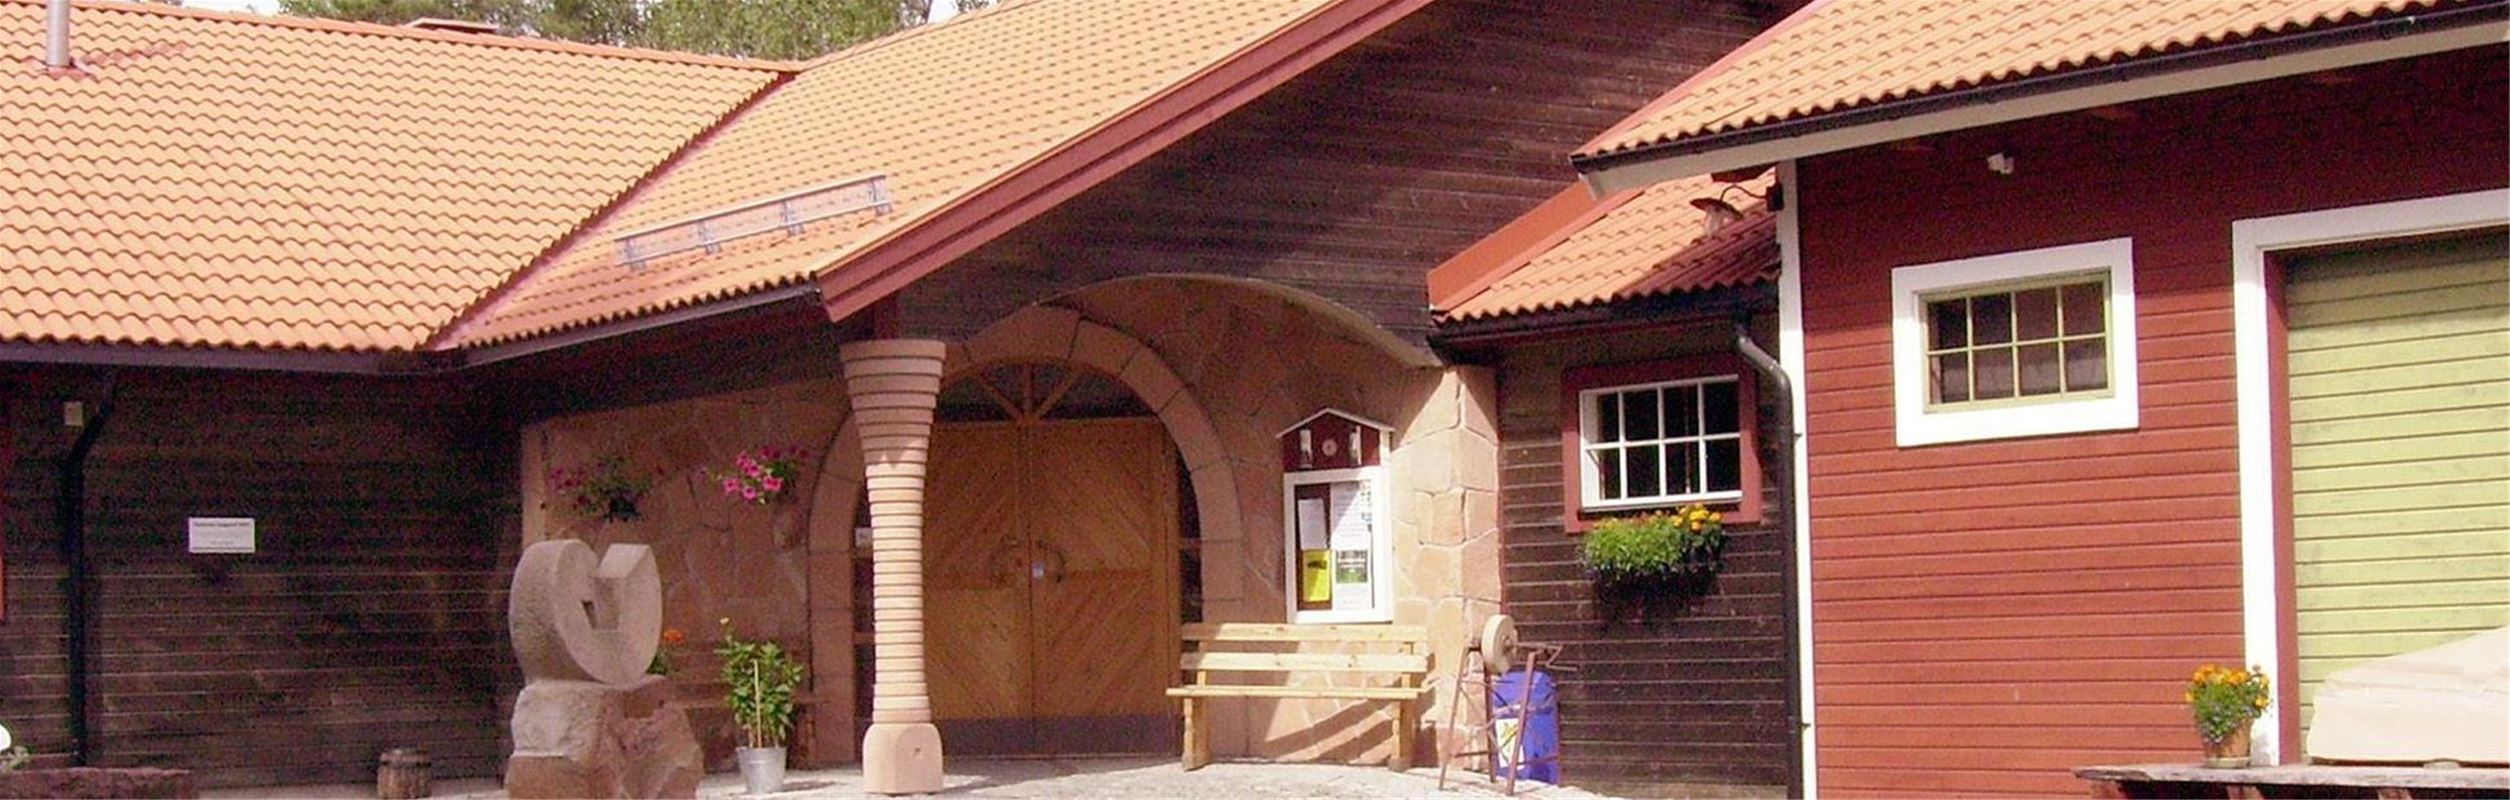 Entrance to the Slipsten Museum.